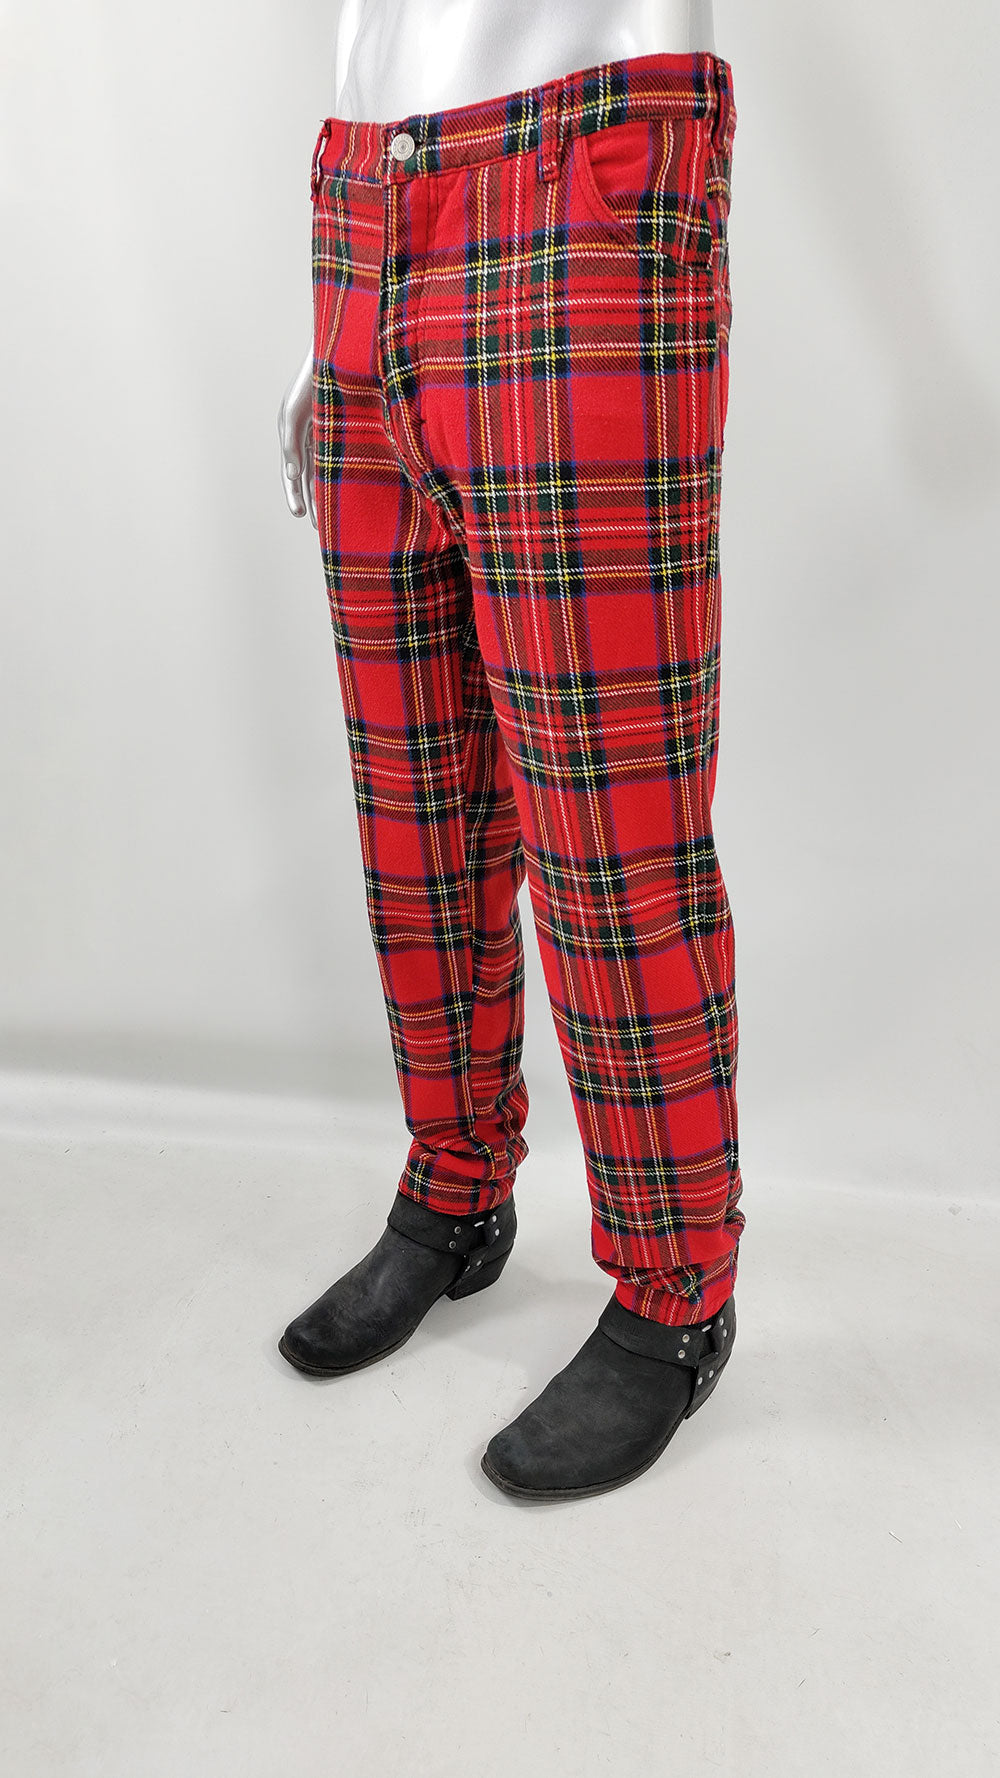 Mens vintage plaid check pants in red and green woolen fabric.